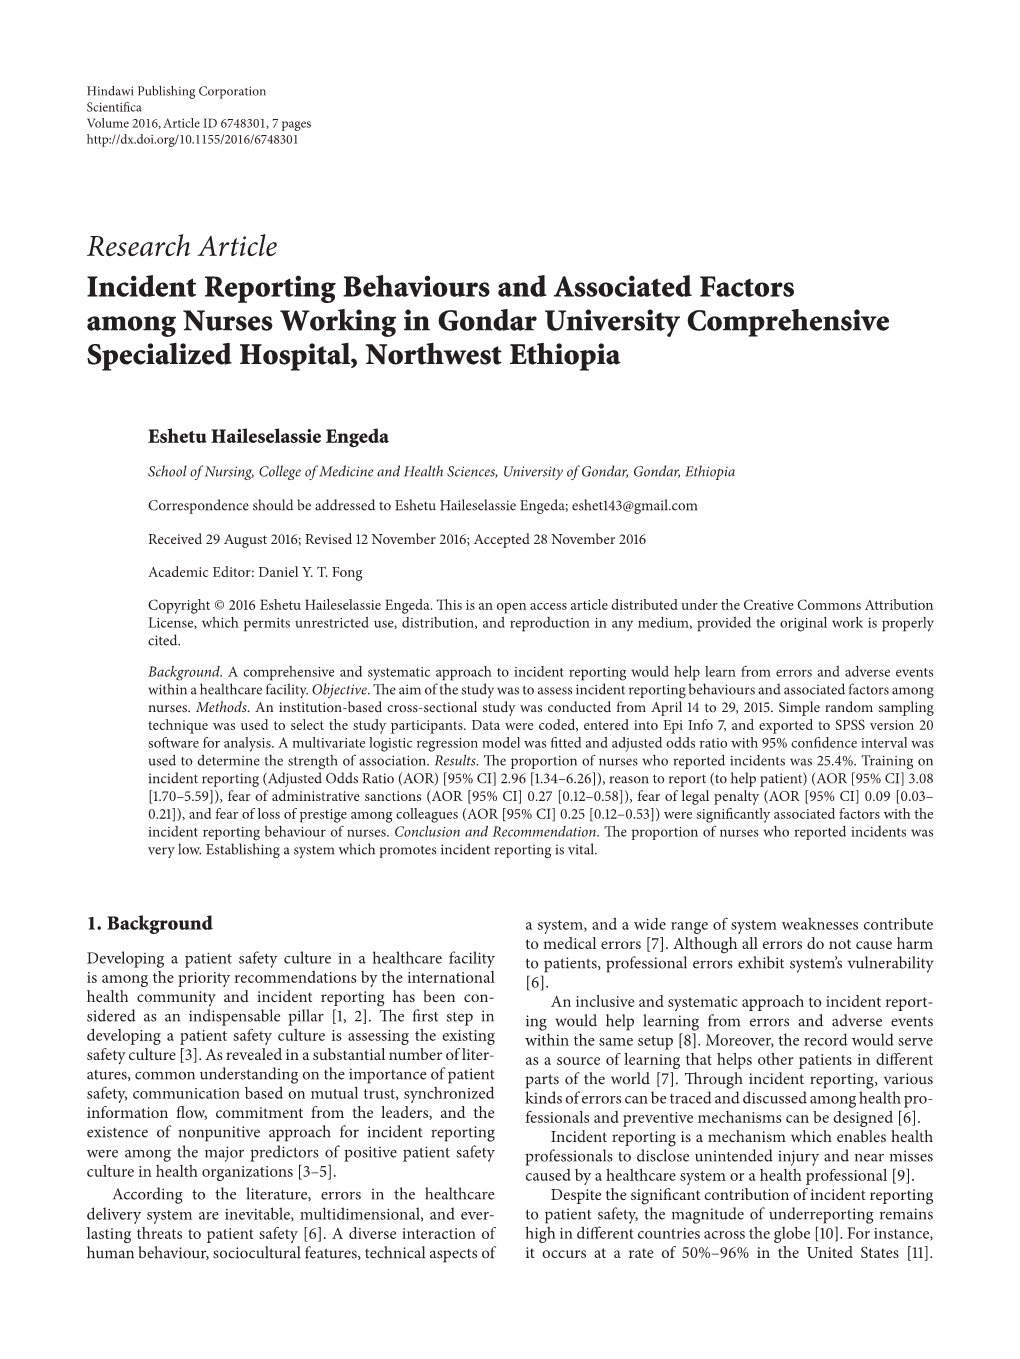 Incident Reporting Behaviours and Associated Factors Among Nurses Working in Gondar University Comprehensive Specialized Hospital, Northwest Ethiopia